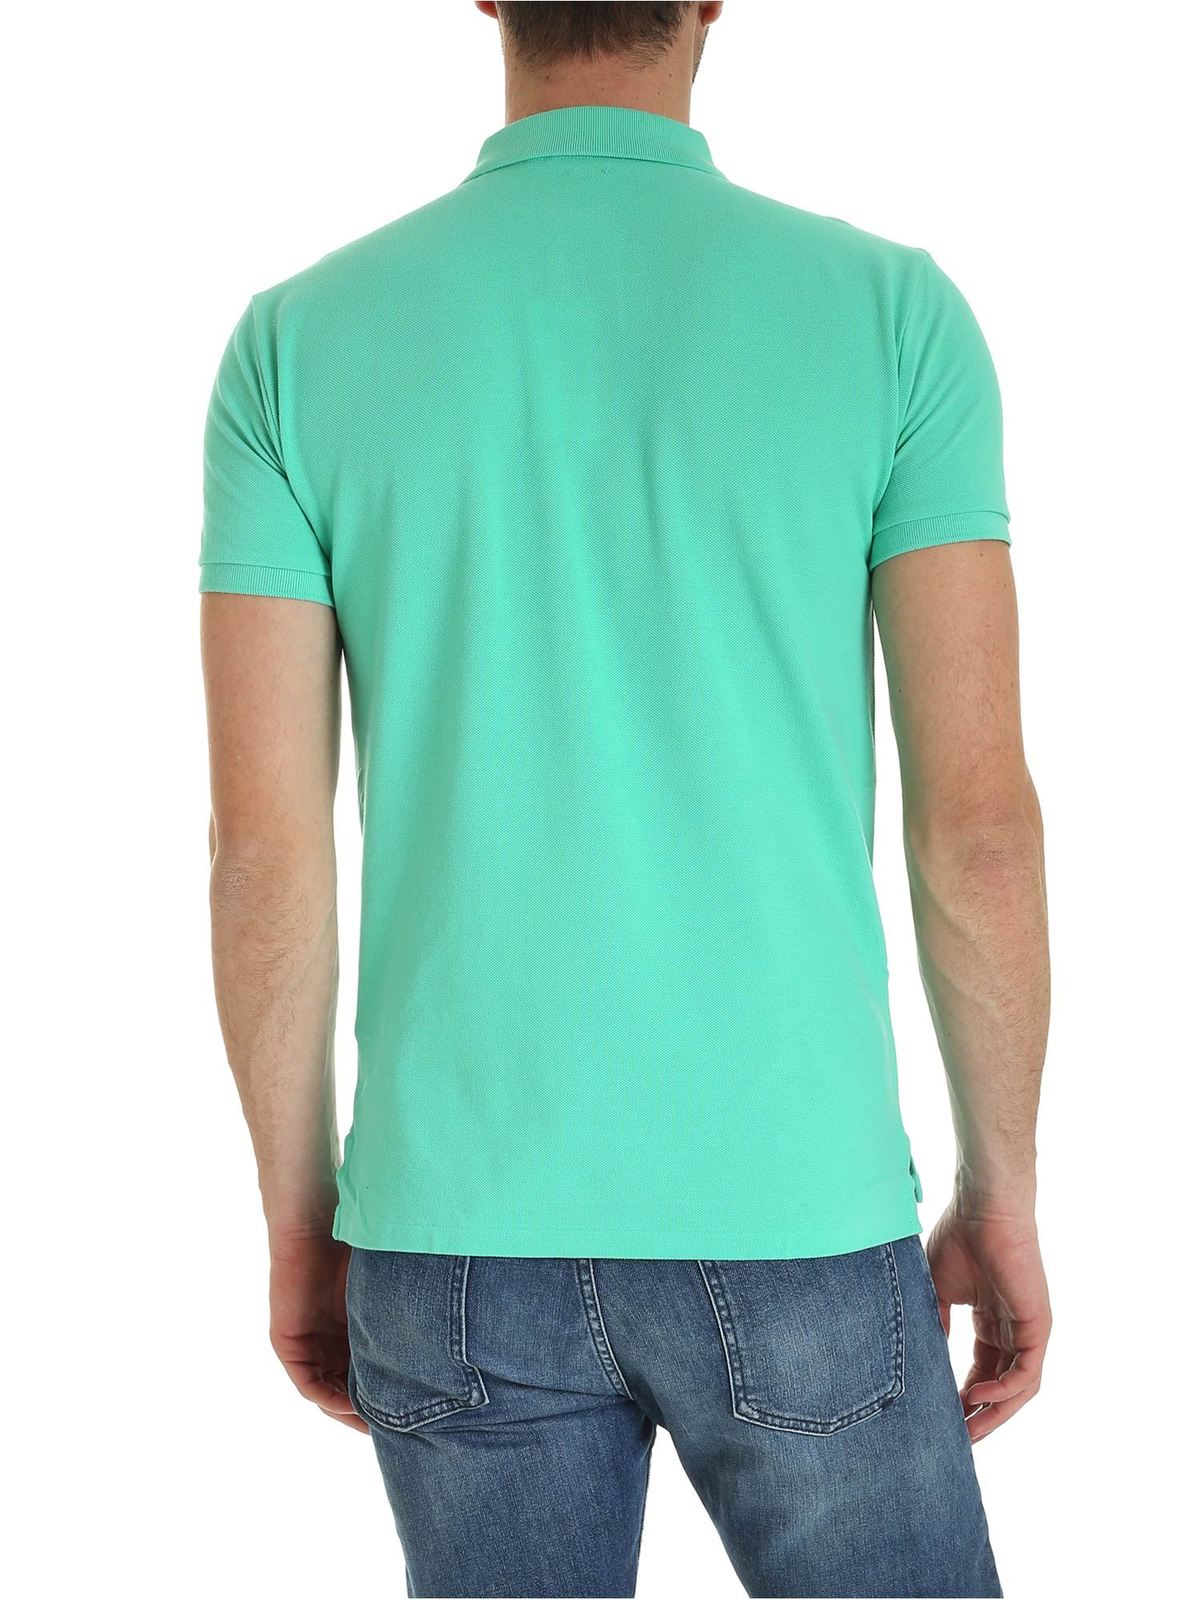 Polo shirts Polo Ralph Lauren - Slim fit polo shirt in mint green with pink  l - 710795080020